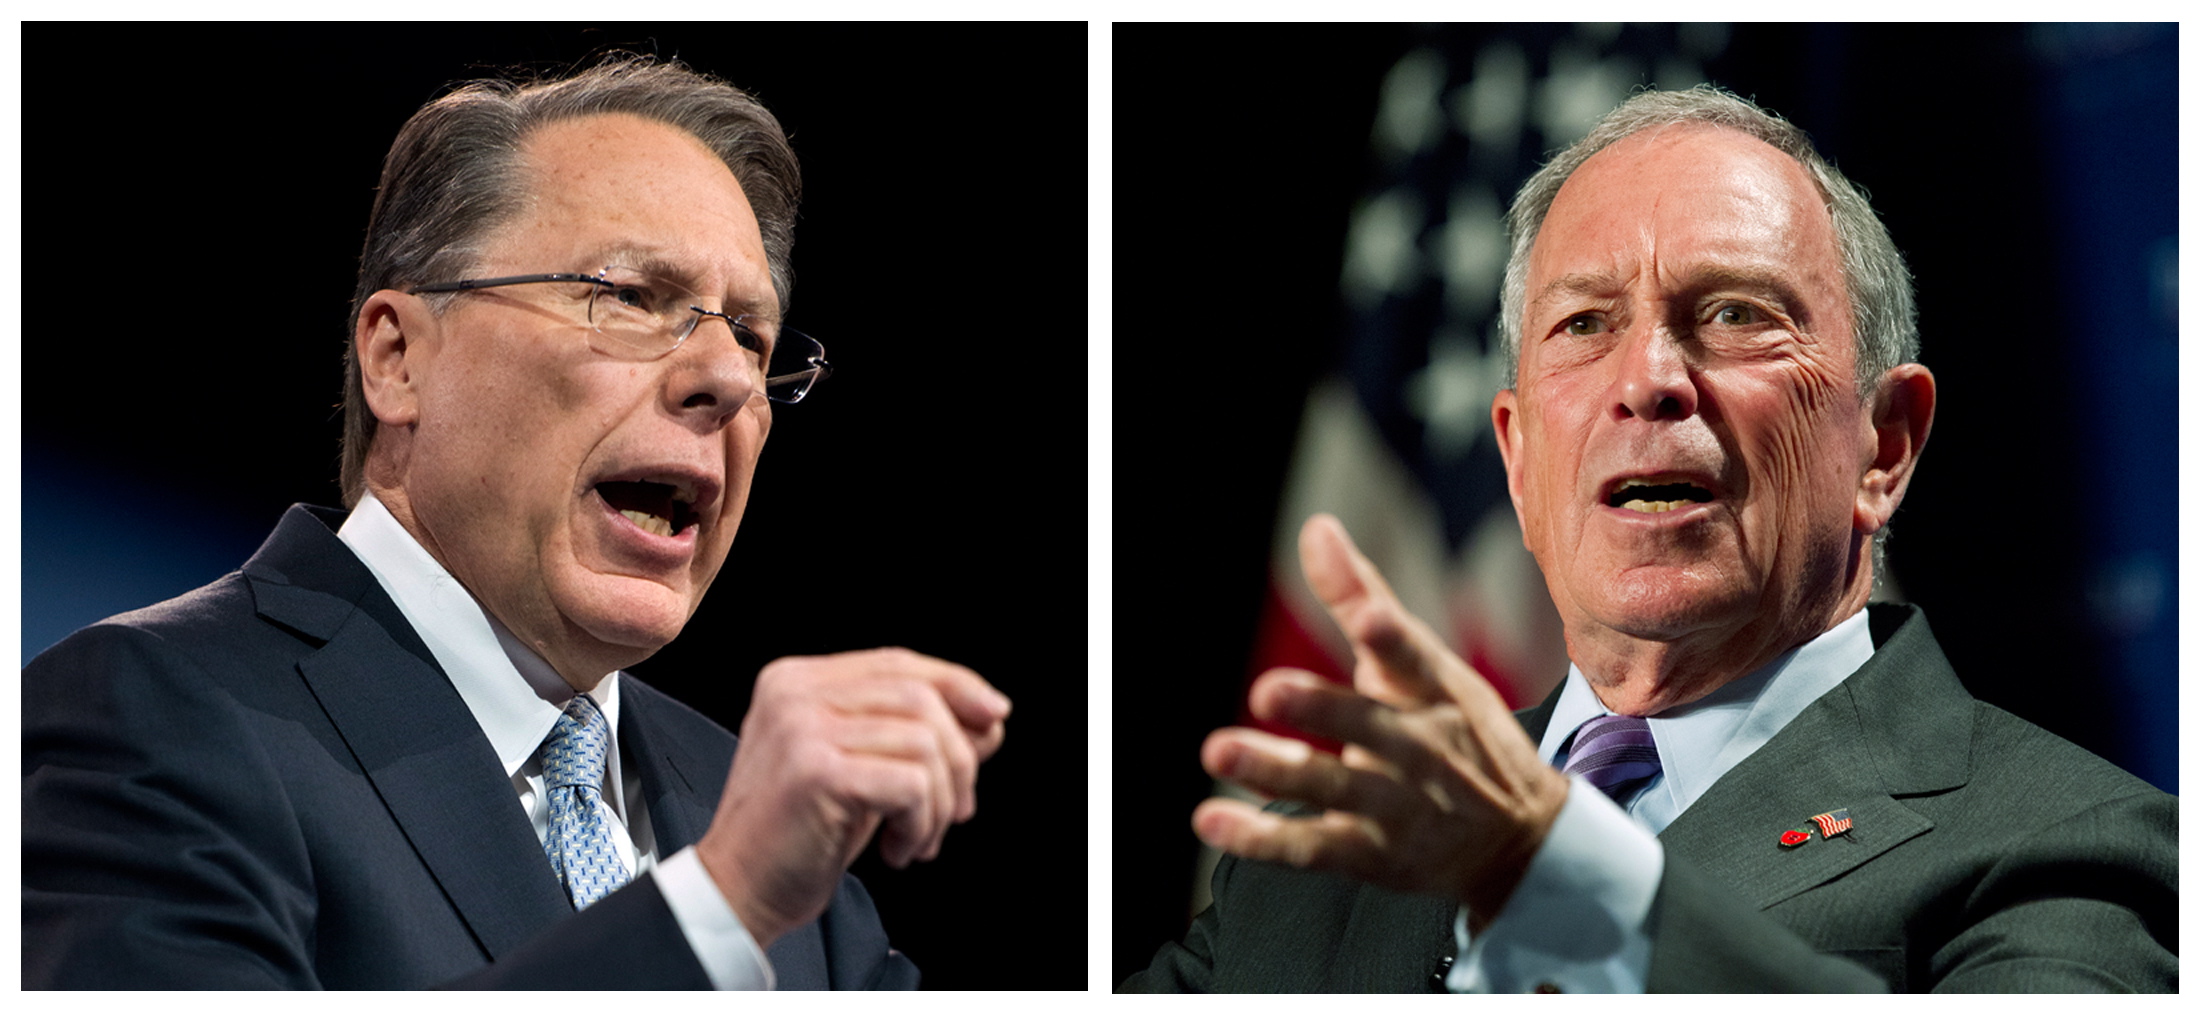 Wayne LaPierre, left, is CEO of the National Rifle Association.